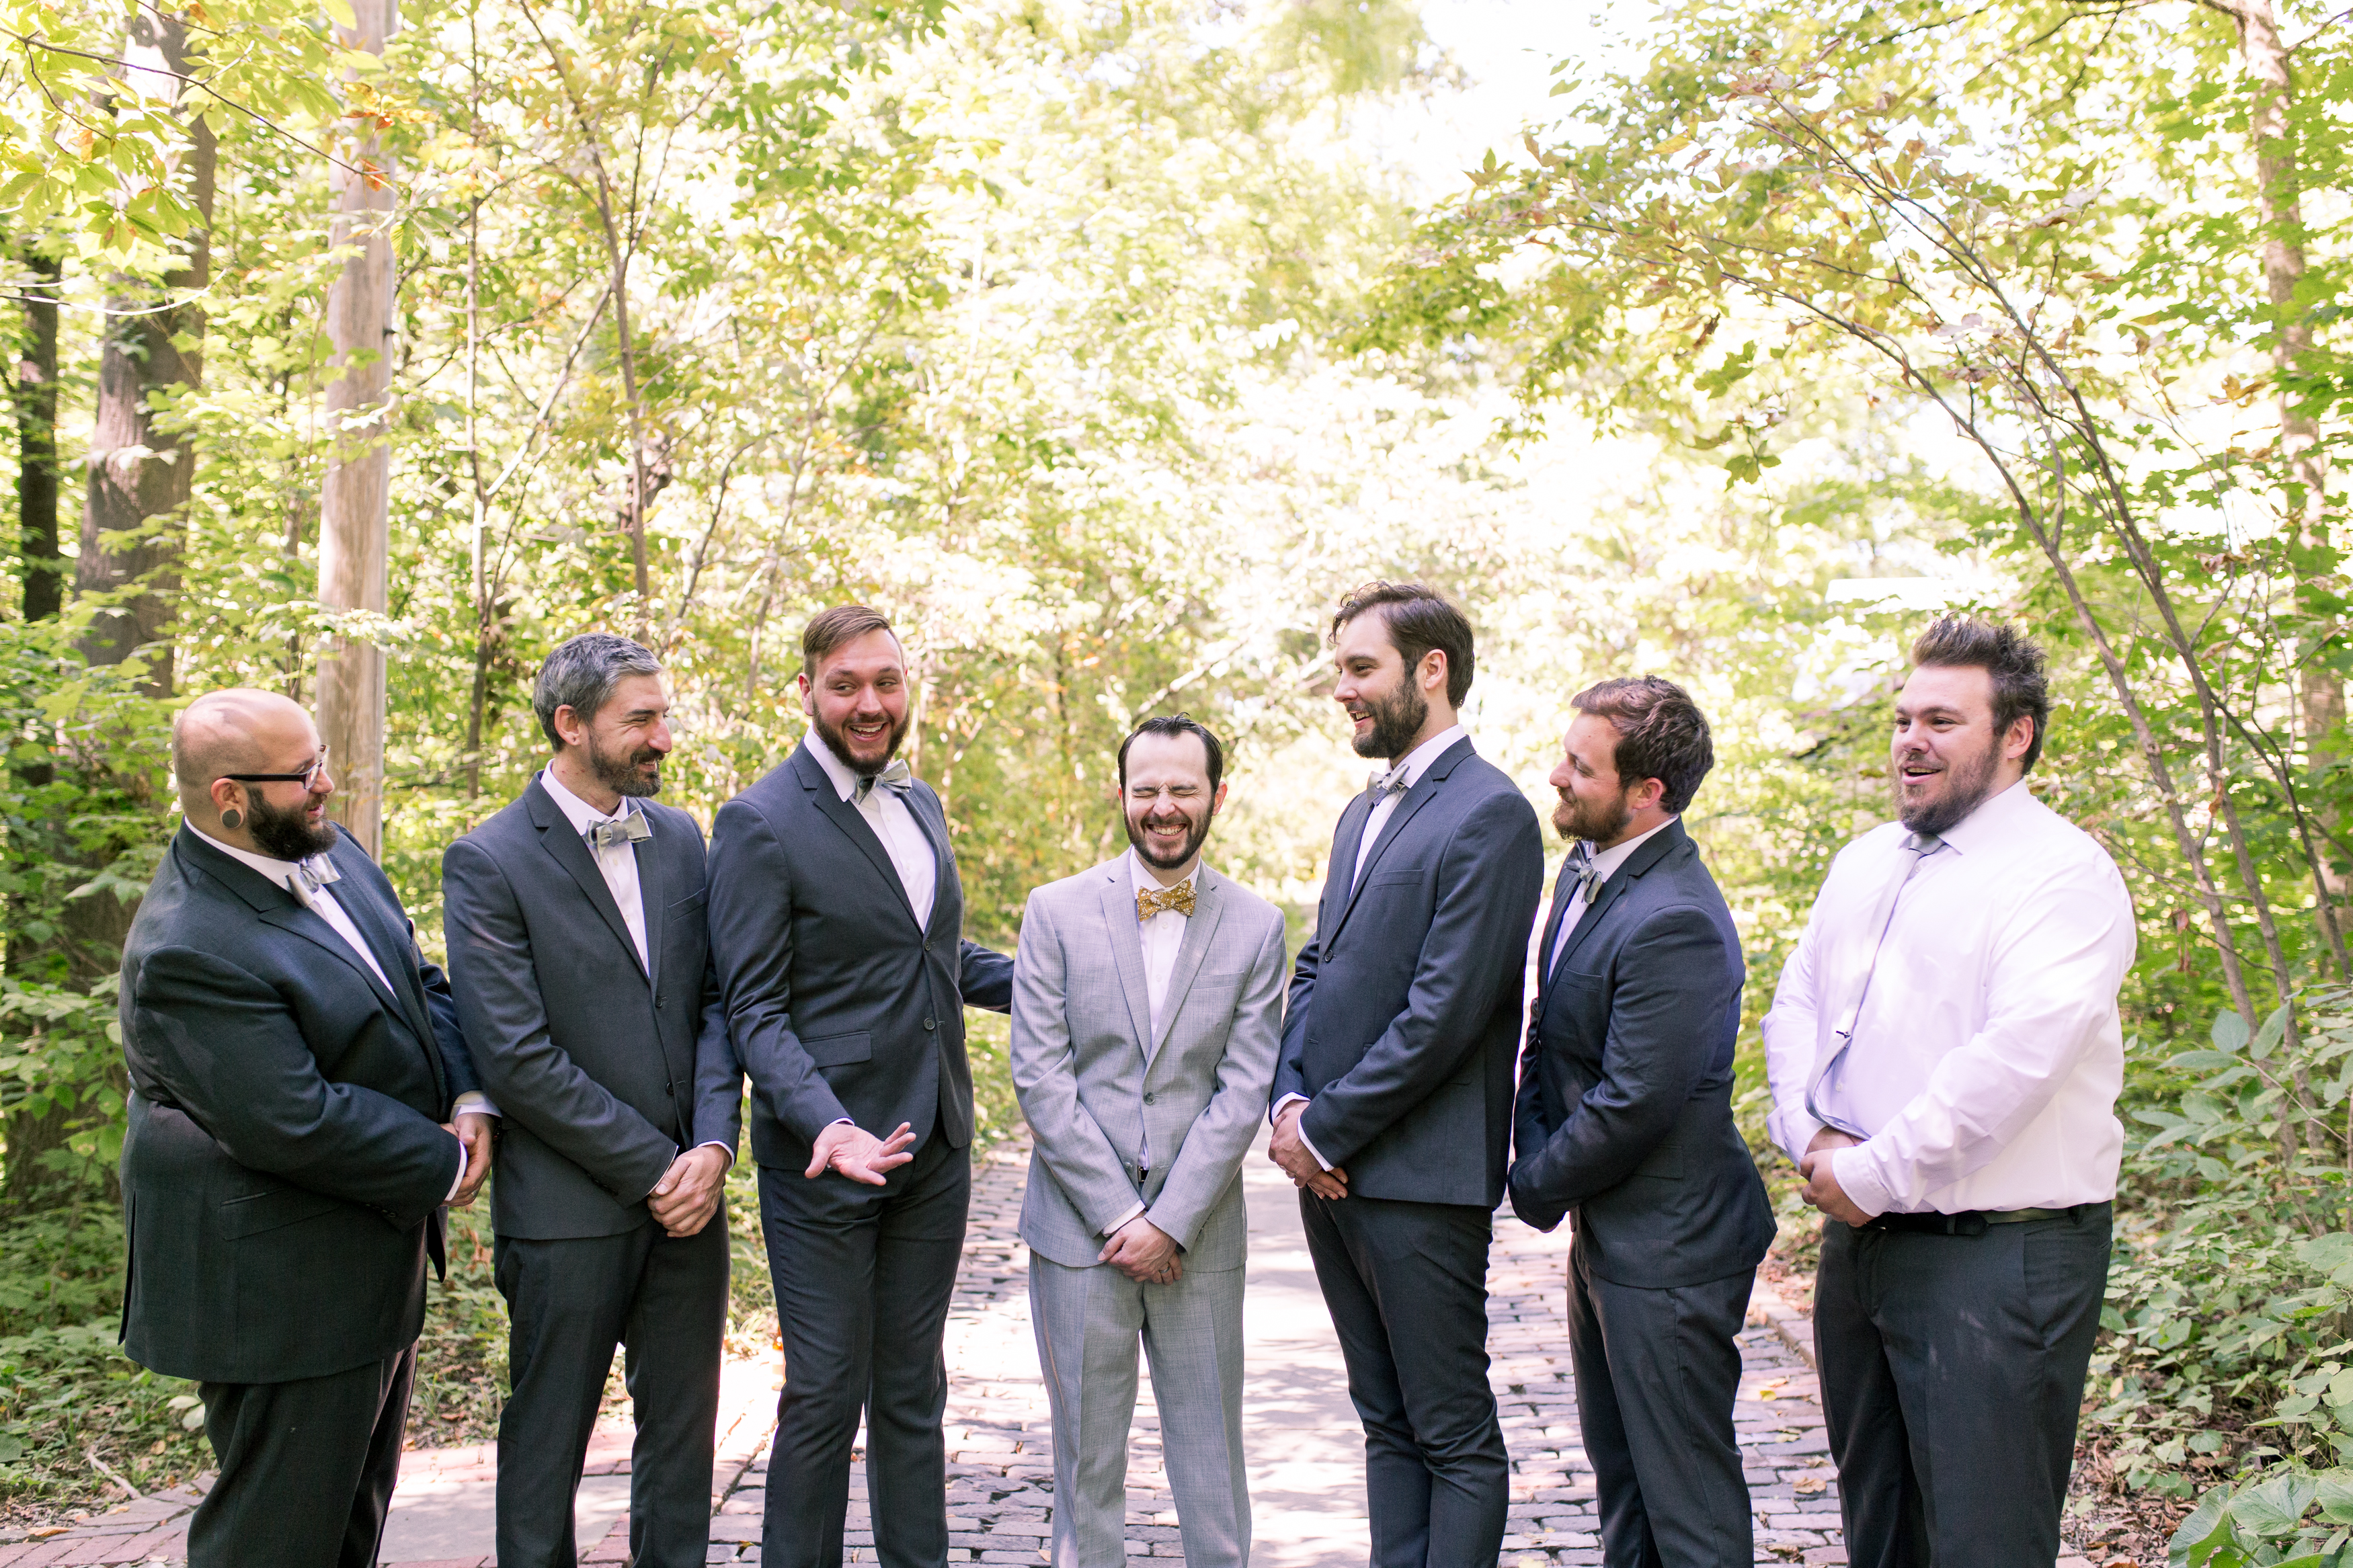 groomsmen and groom portraits before wedding at Minnetrista Cultural Center in Muncie Indiana